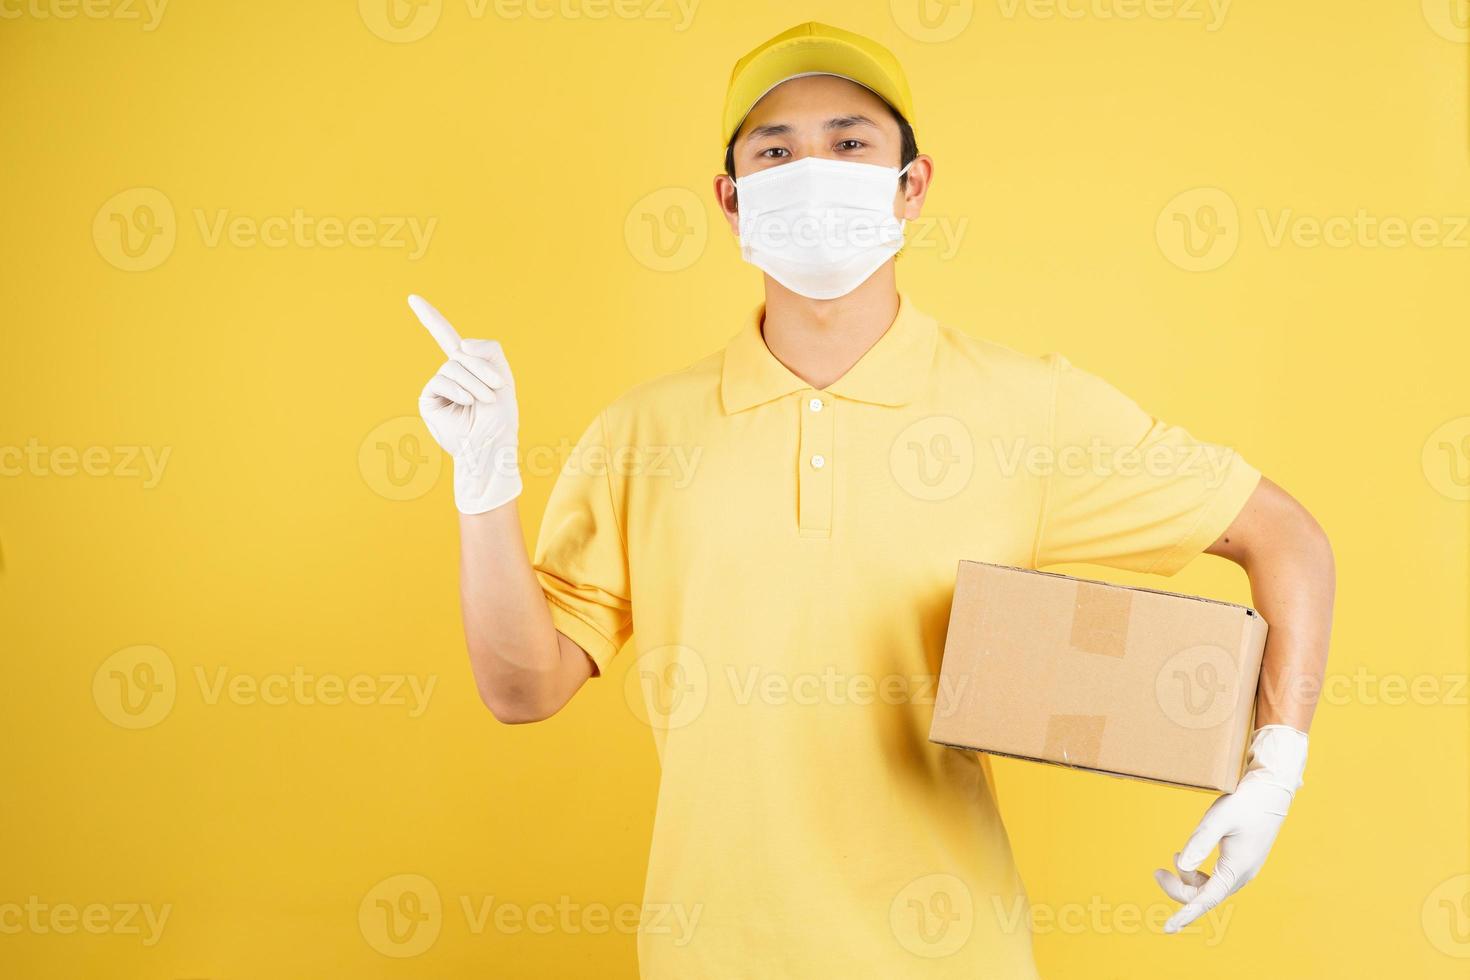 adult, asian, background, box, cardboard box, chinese, coronavirus, courier, covid-19, deliver, delivery, employees, filipinos, handsome, happiness, holding, indonesian, internet, isolated, japanese, job, korean, malaysian, male, man, mask, men, mobile, o photo